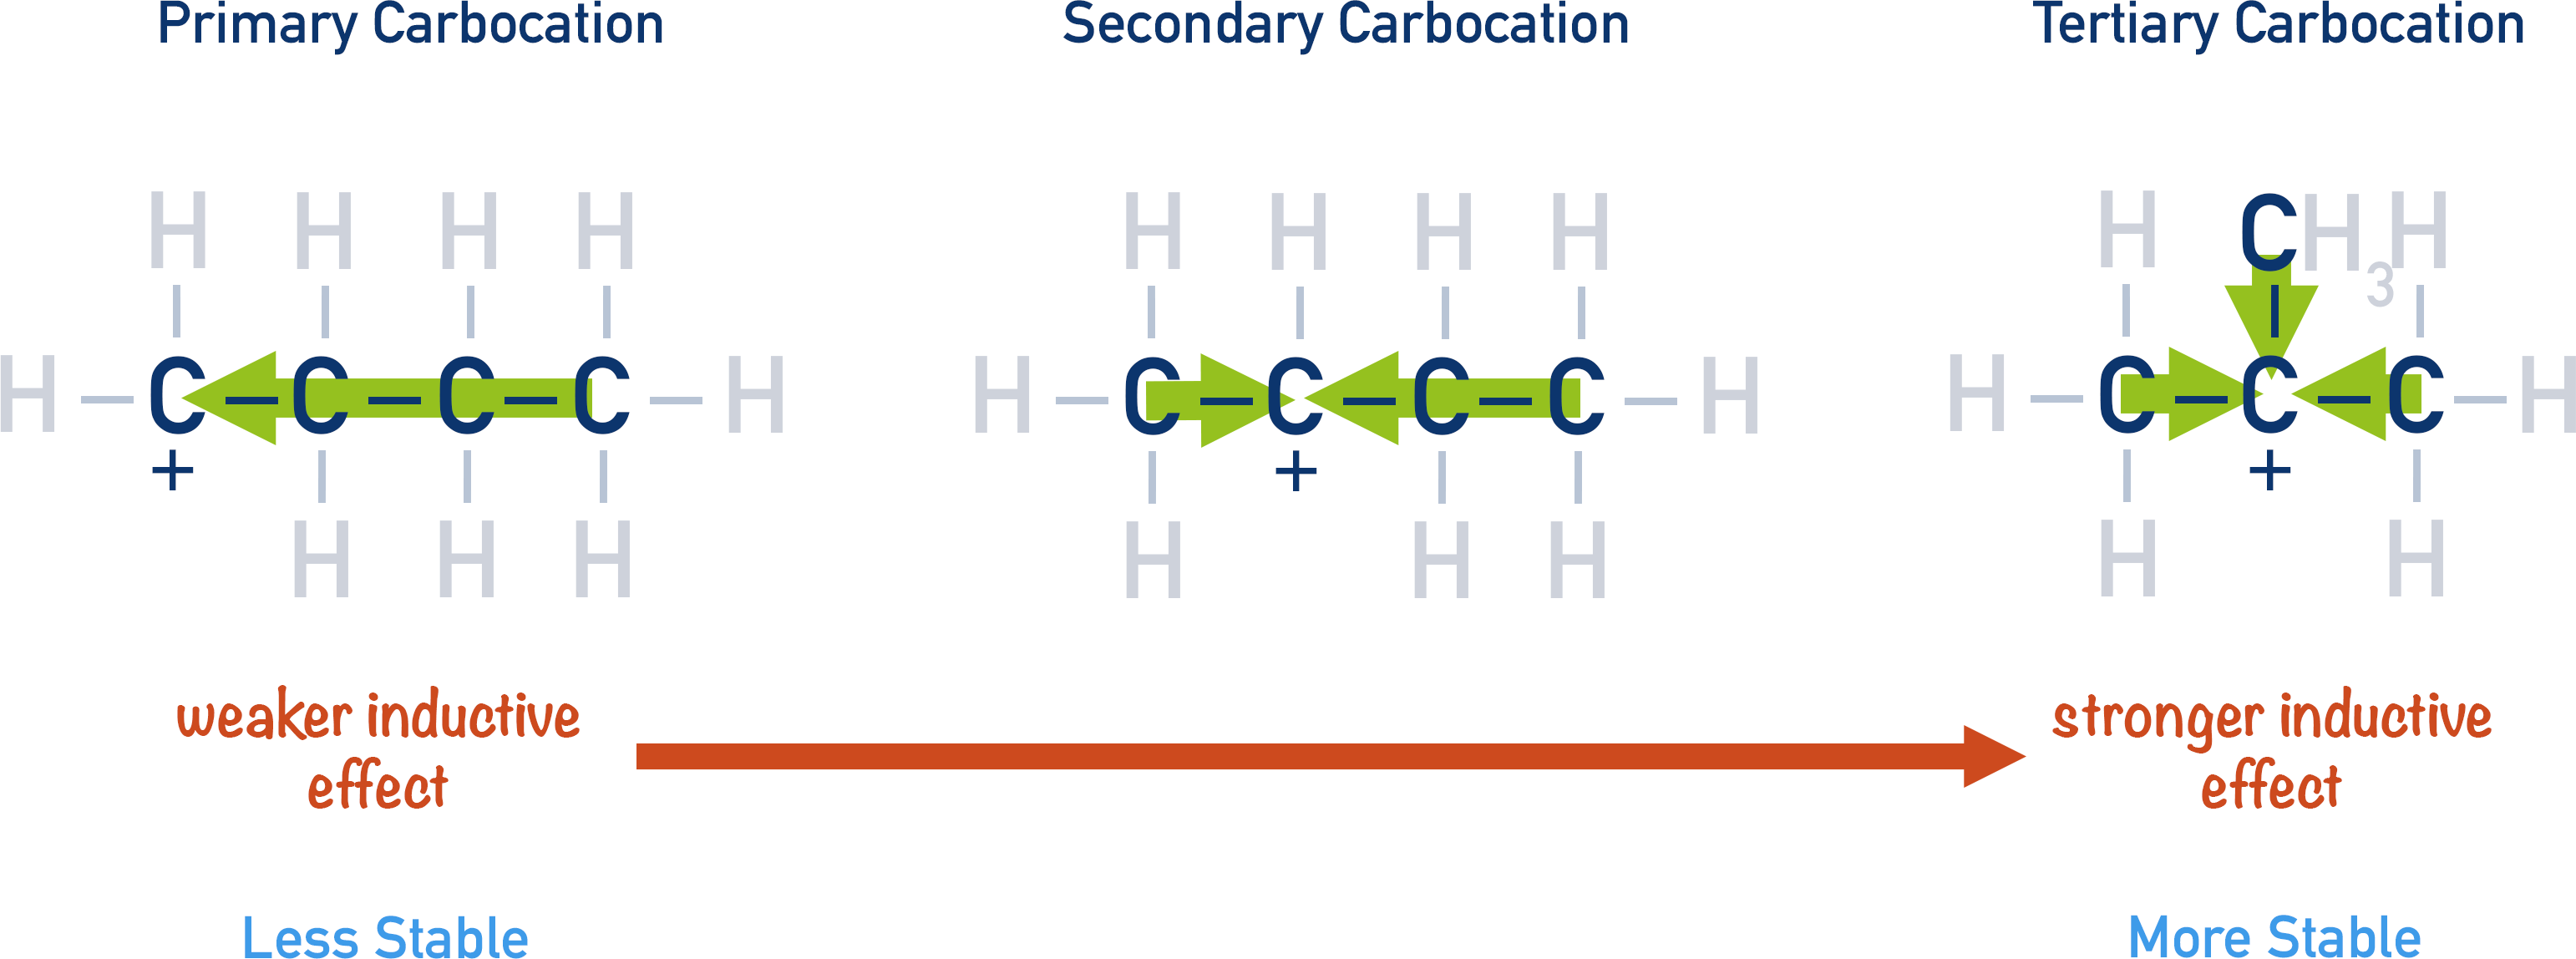 primary secondary tertiary carbocation stability positive inductive effect